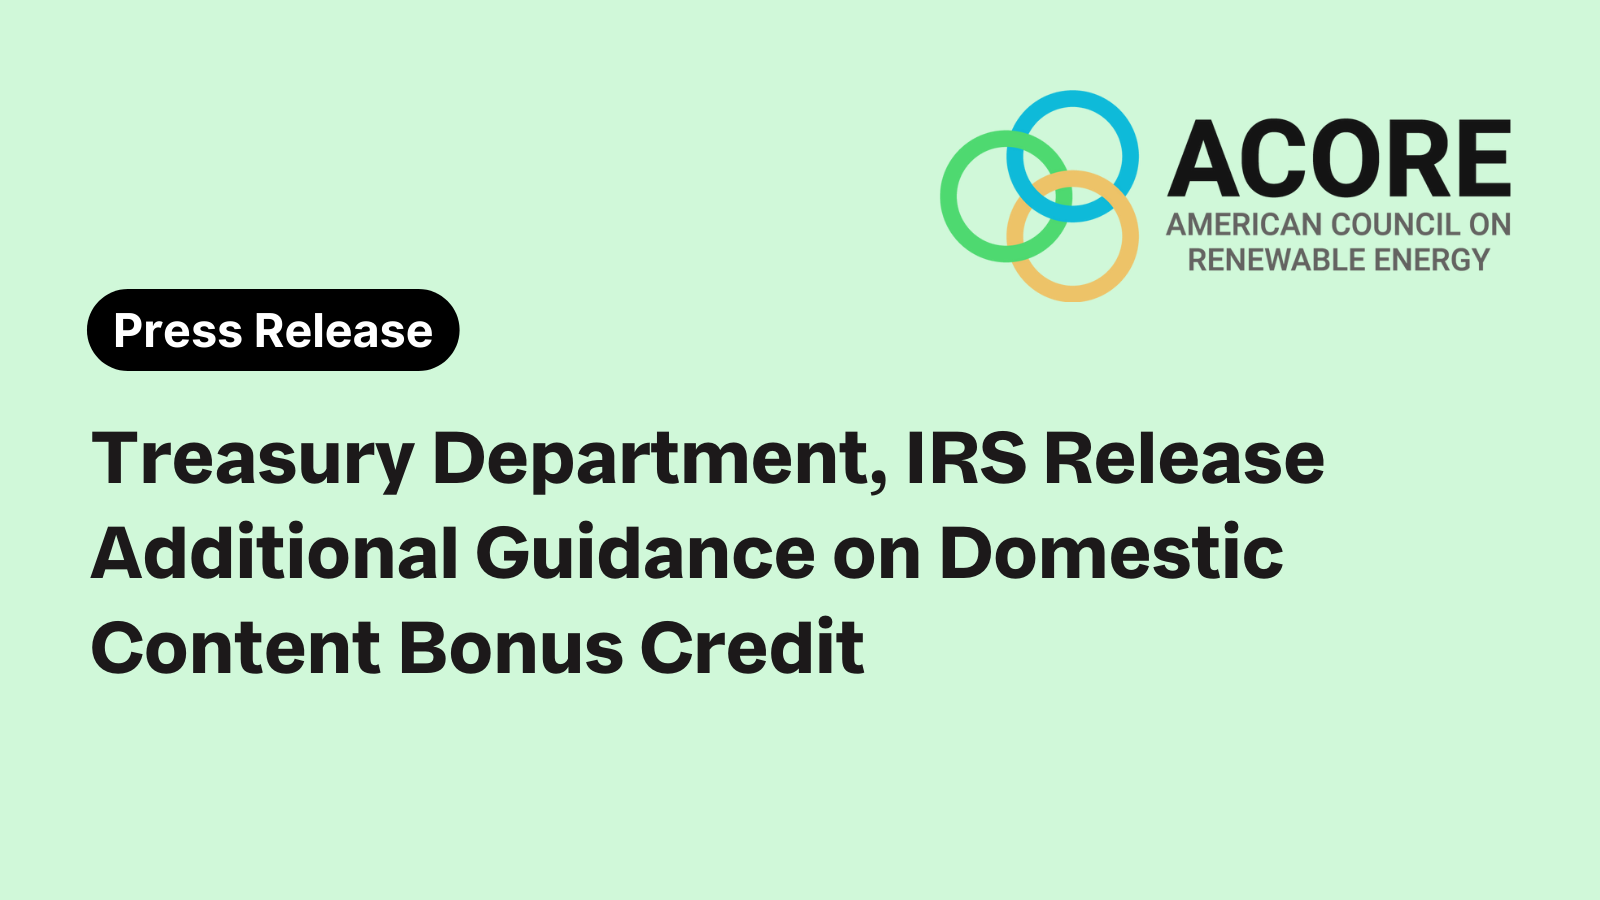 Treasury Department, IRS Release Additional Guidance on Domestic Content Bonus Credit